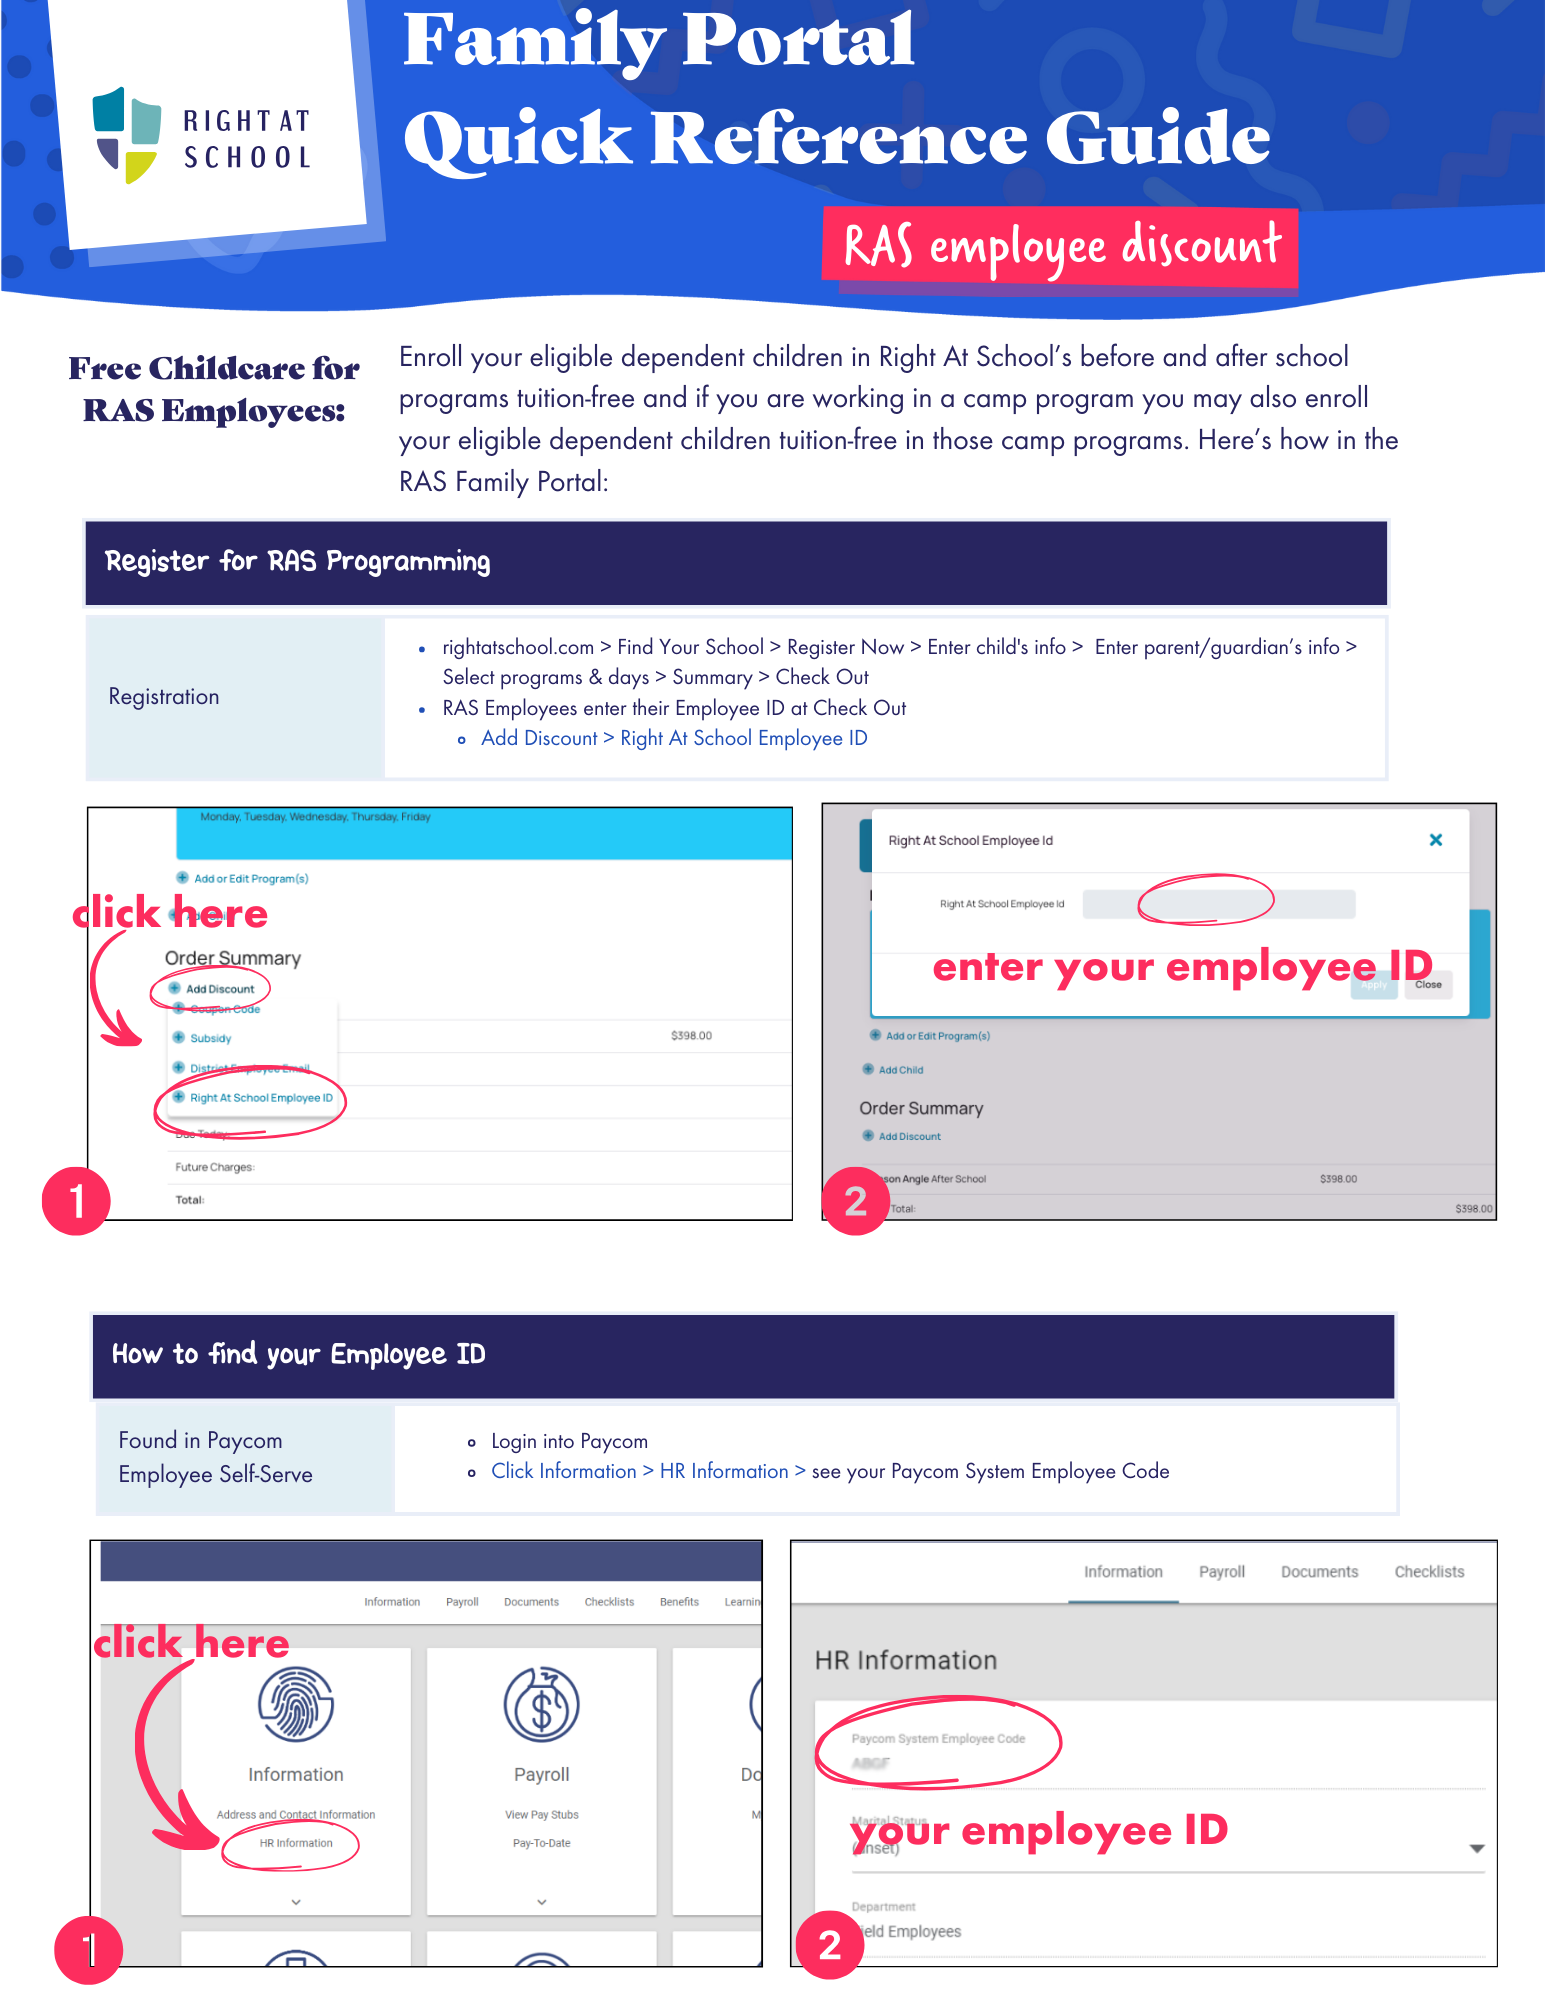 RAS Family Portal (LineLeader) Quick Reference Guide (for RAS Employee Discount).png